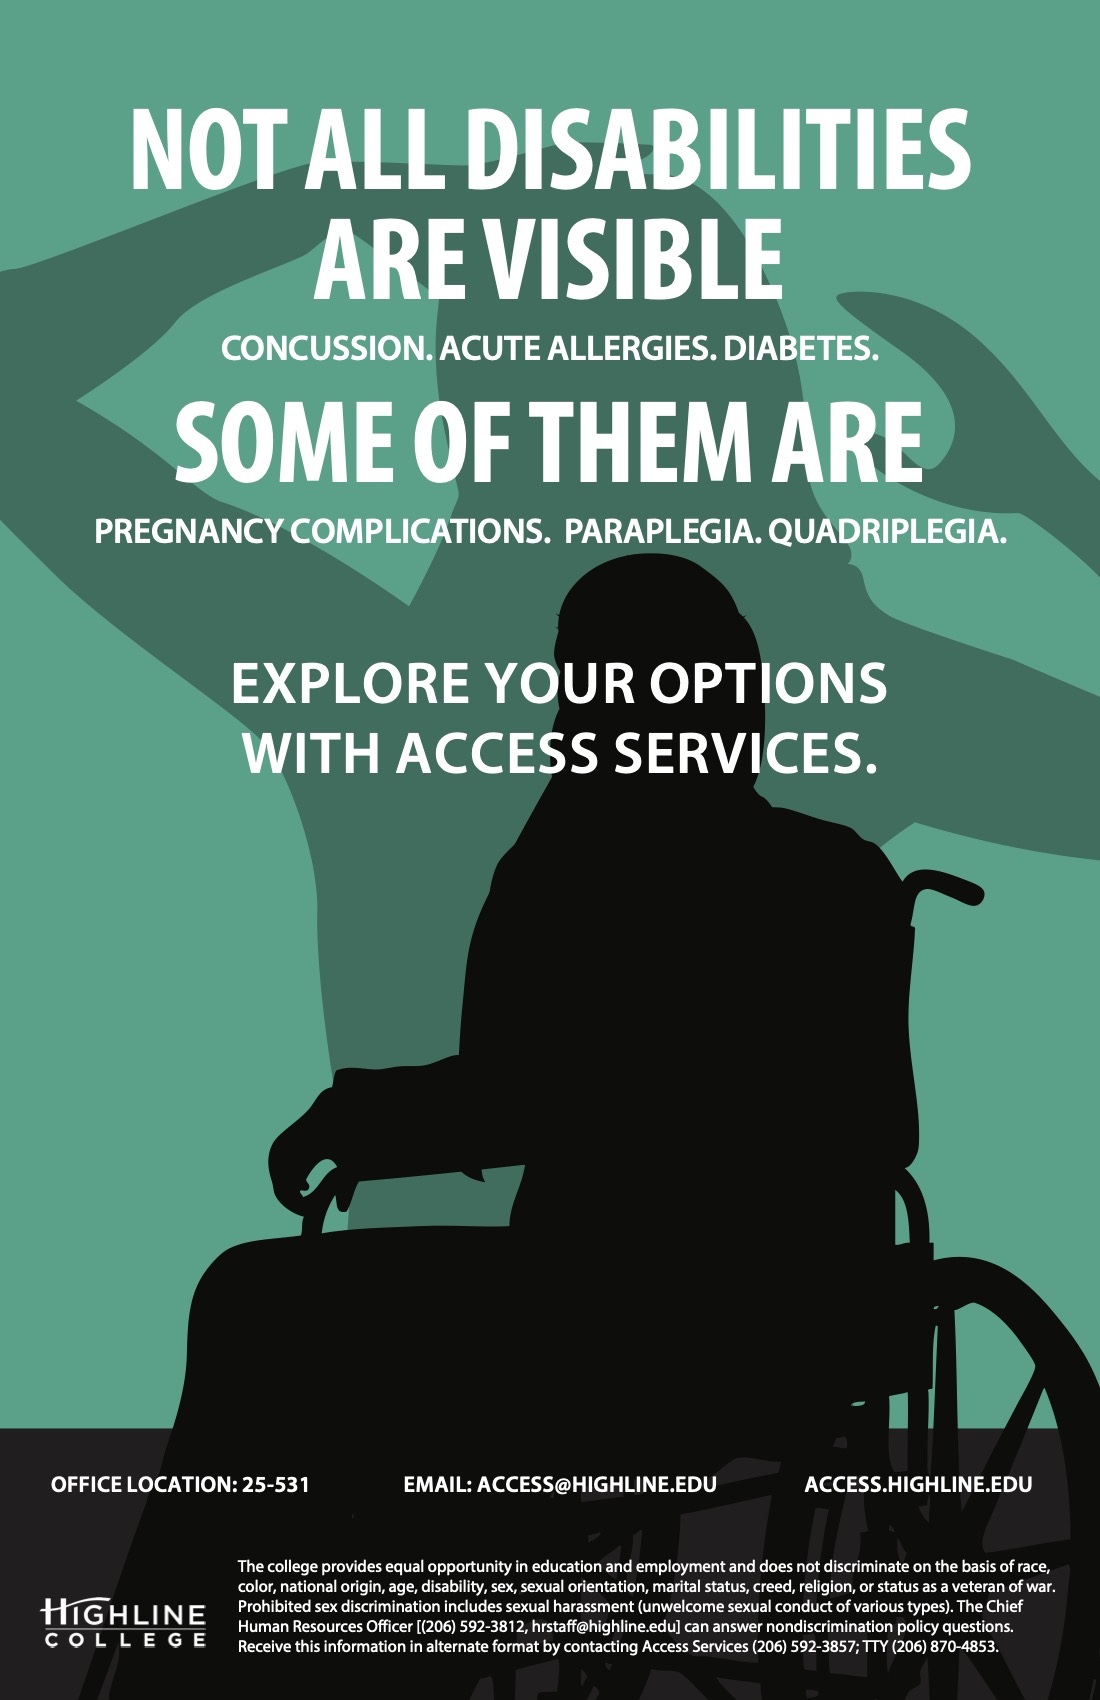 Drawn silhouette of a person sitting in a wheelchair over a green background, with text that says, 'Not all disabilities are visible. Some of them are.'